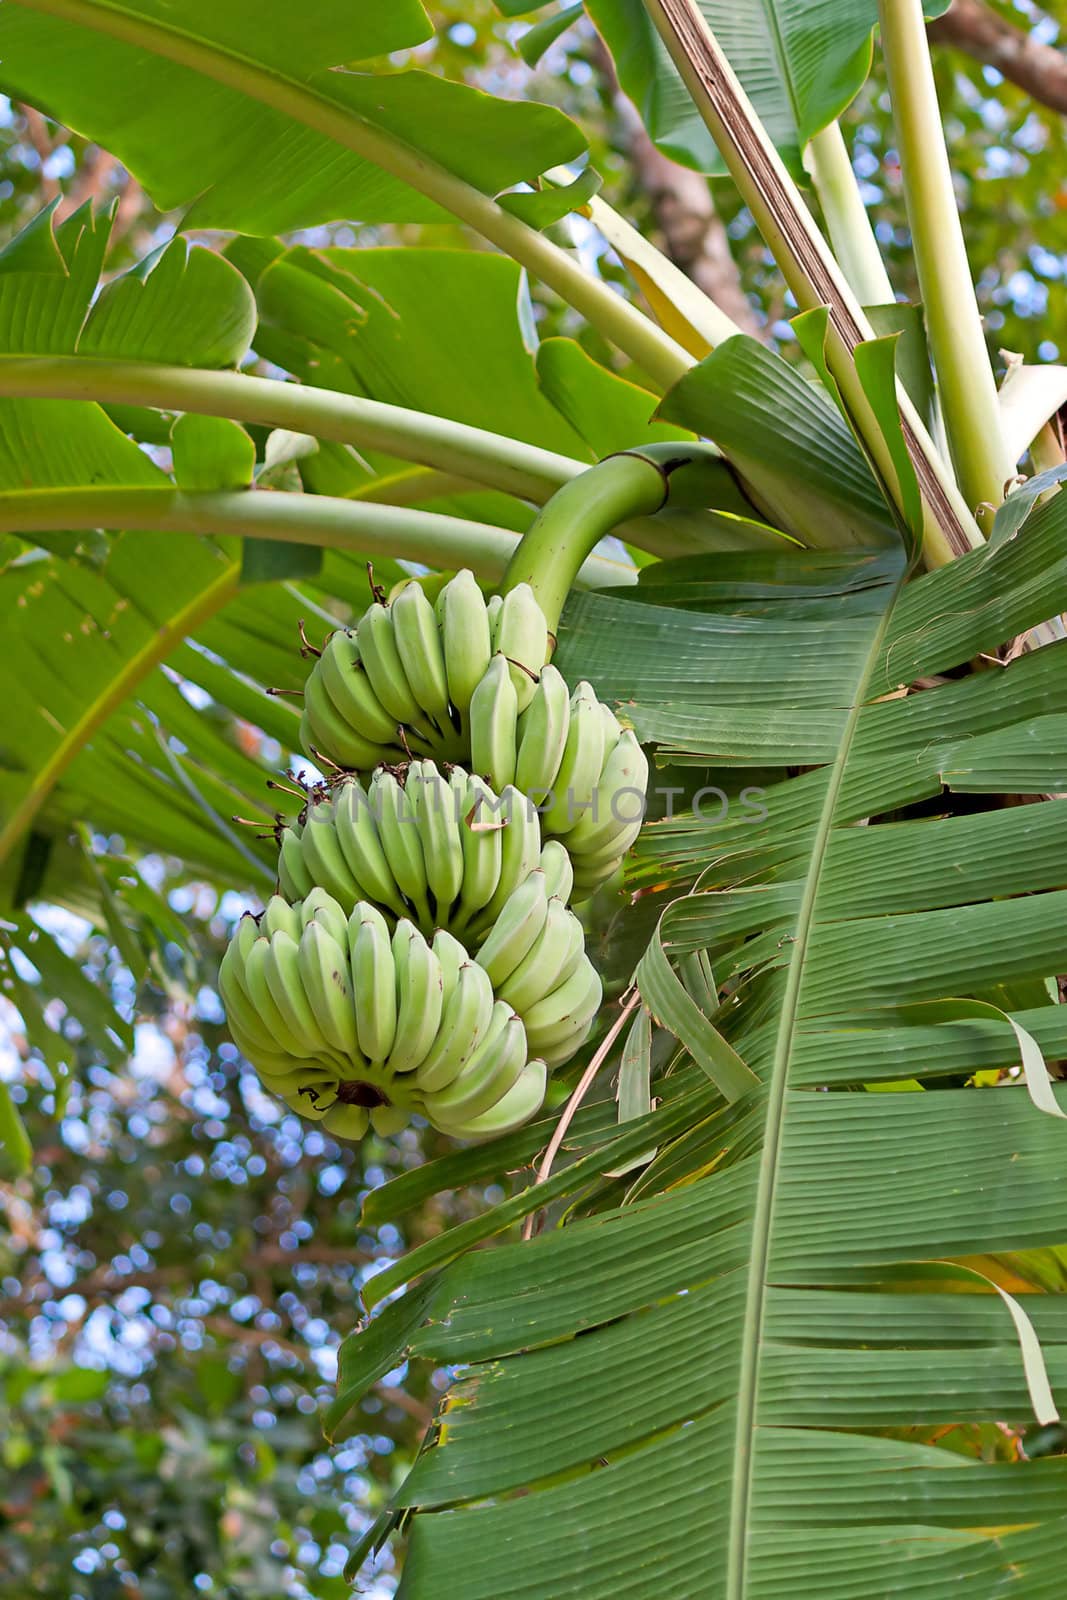 Bunches of bananas hanging on  plant on background of leaves, Thailand.